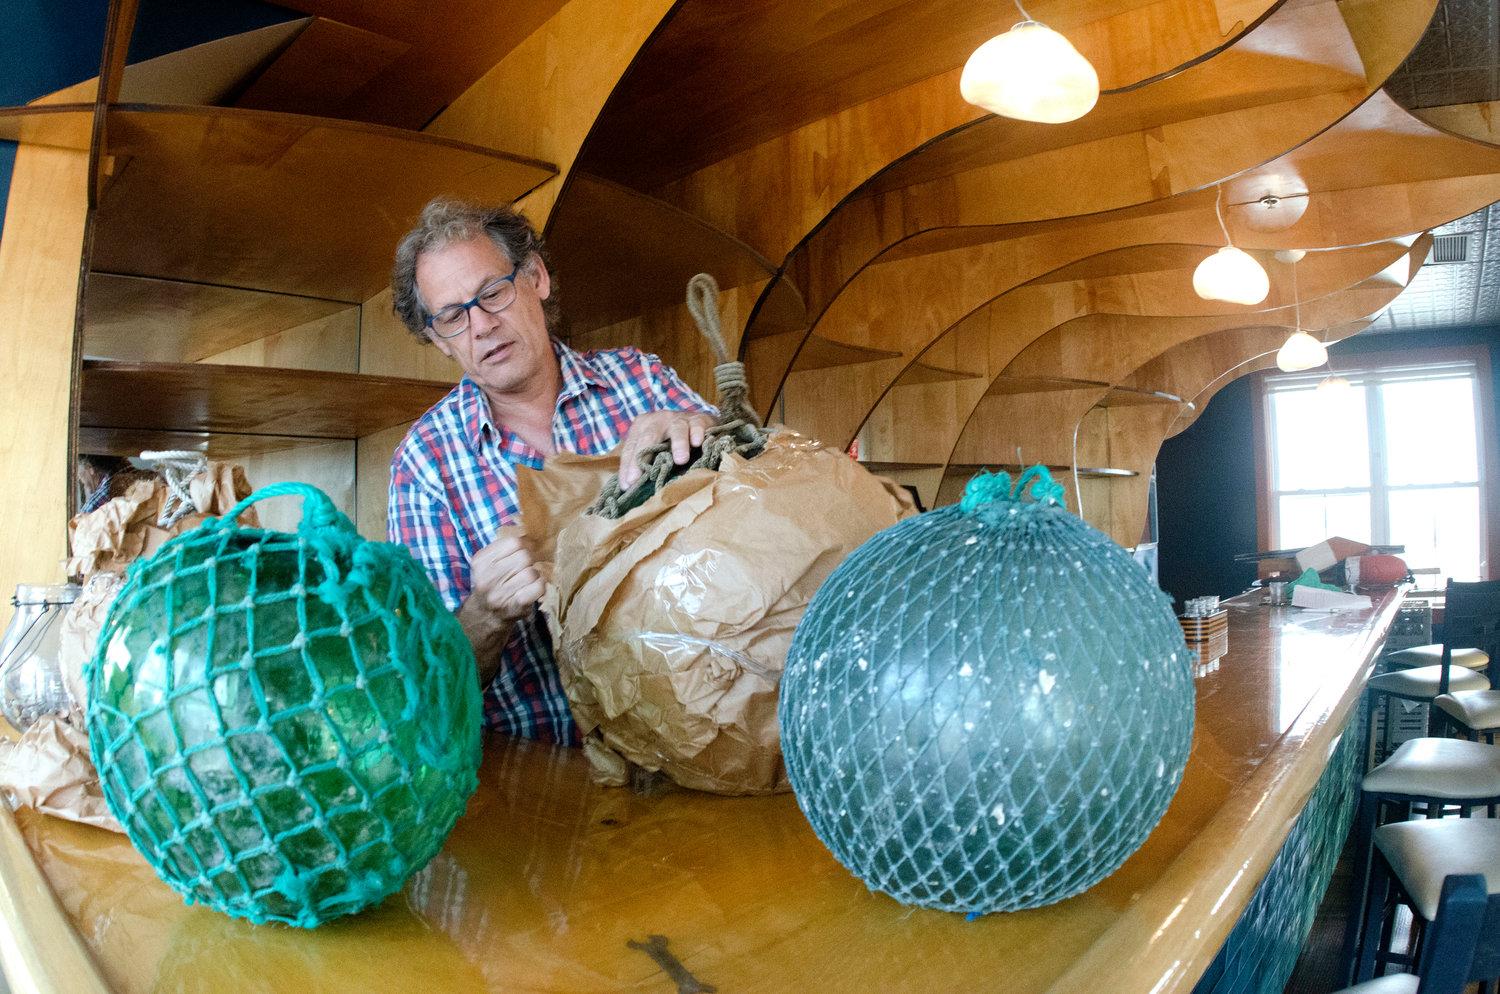 Russell Goyette unwraps new decor fixtures during a tour of the newly renovated restaurant.